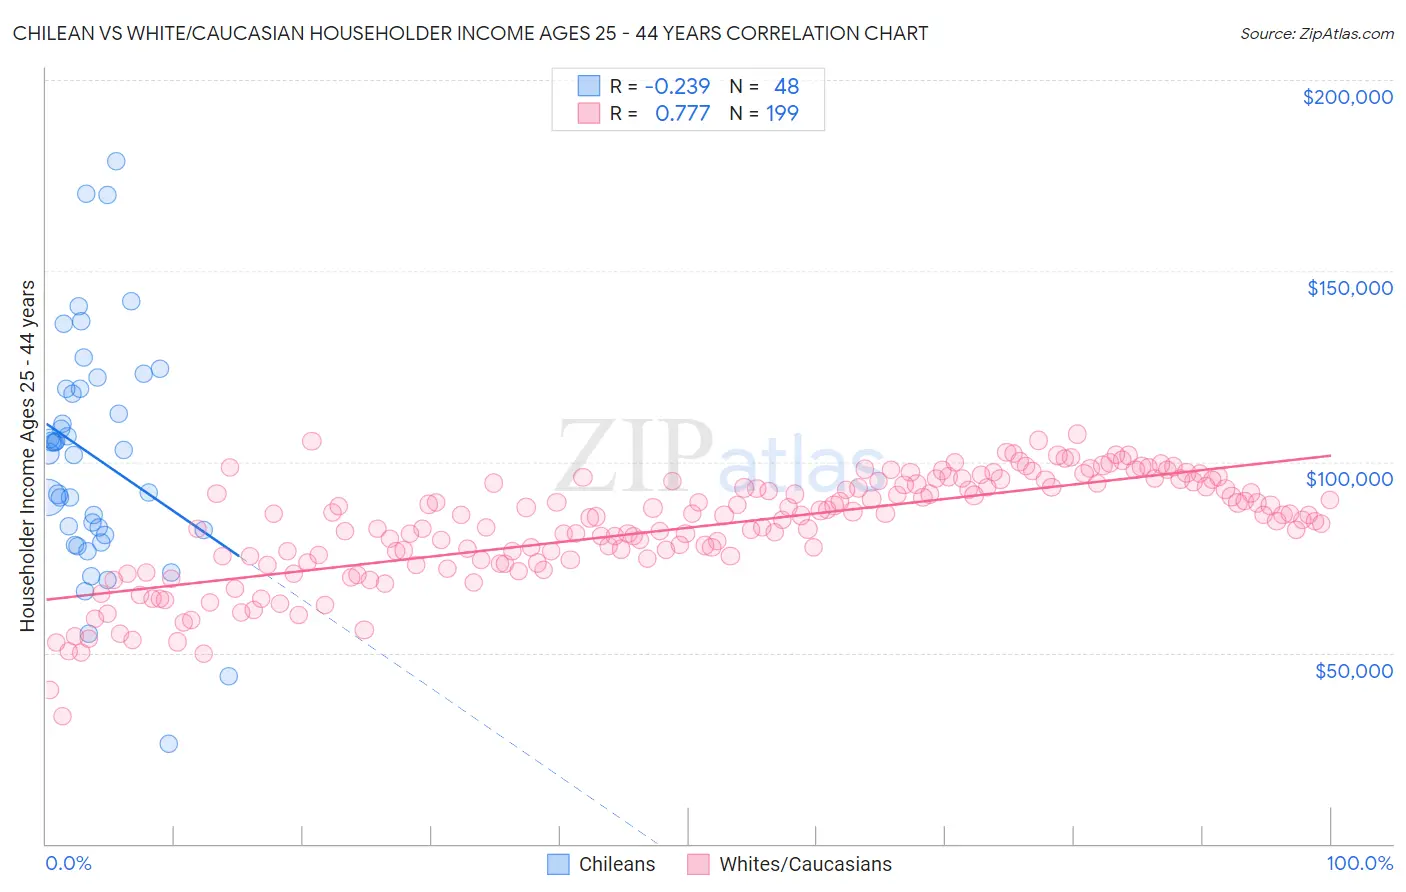 Chilean vs White/Caucasian Householder Income Ages 25 - 44 years